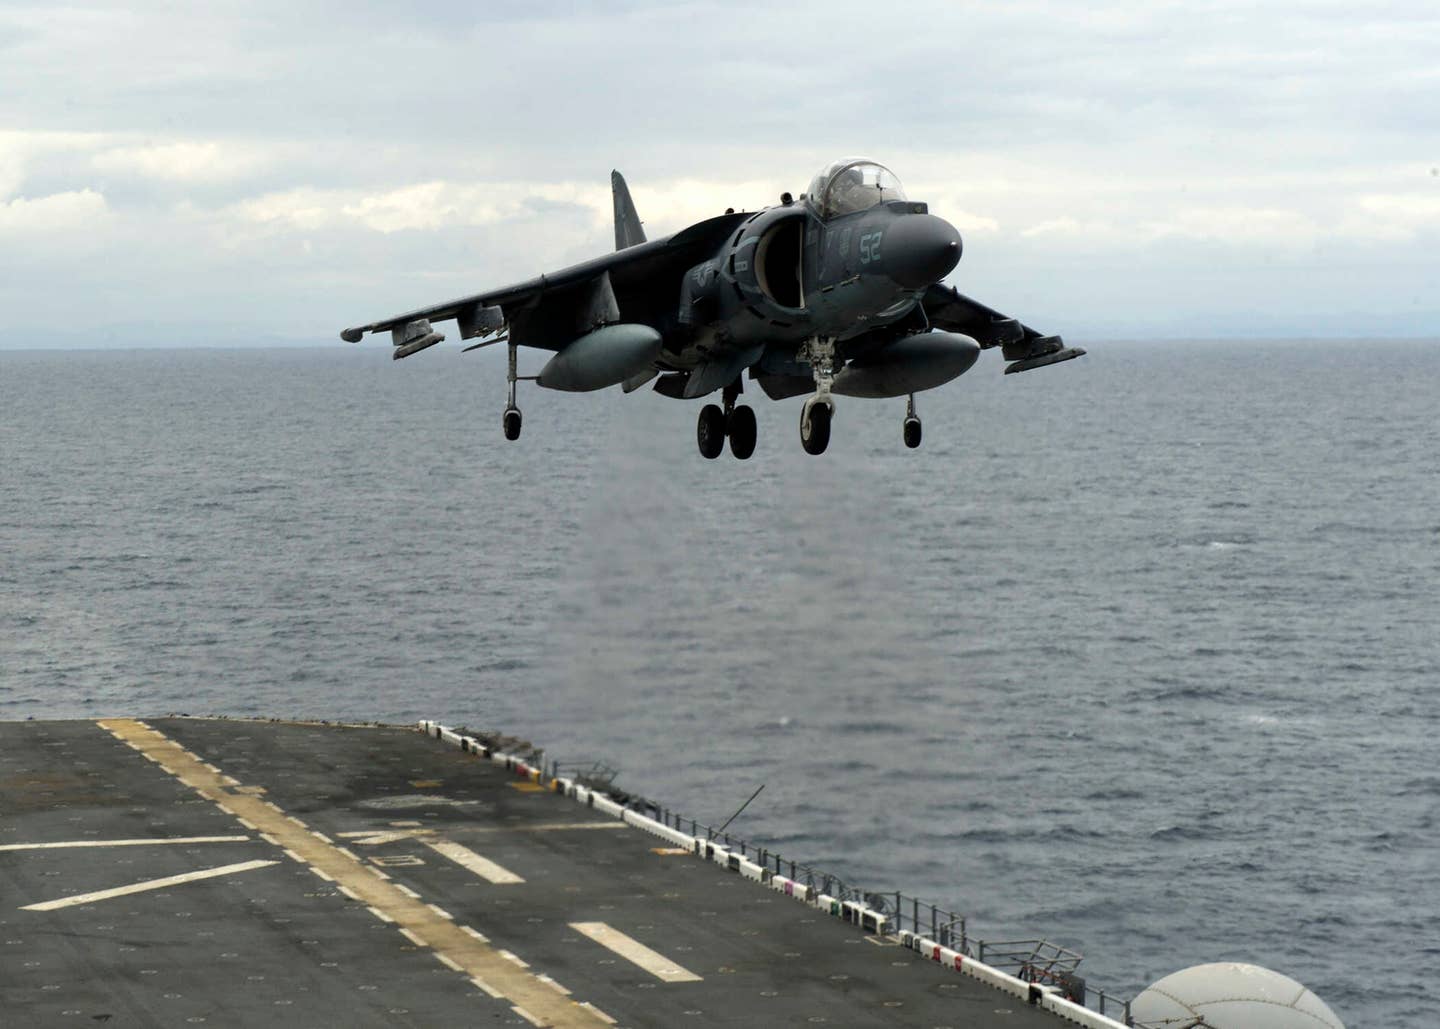 An AV-8B Harrier assigned to Marine Attack Squadron (VMA) 311 lands on amphibious assault ship USS America (LHA 6). The program that created the Harrier came out of the ZeLL experiments. (U.S. Navy photo by Mass Communication Specialist 1st Class Michael McNabb/Released)